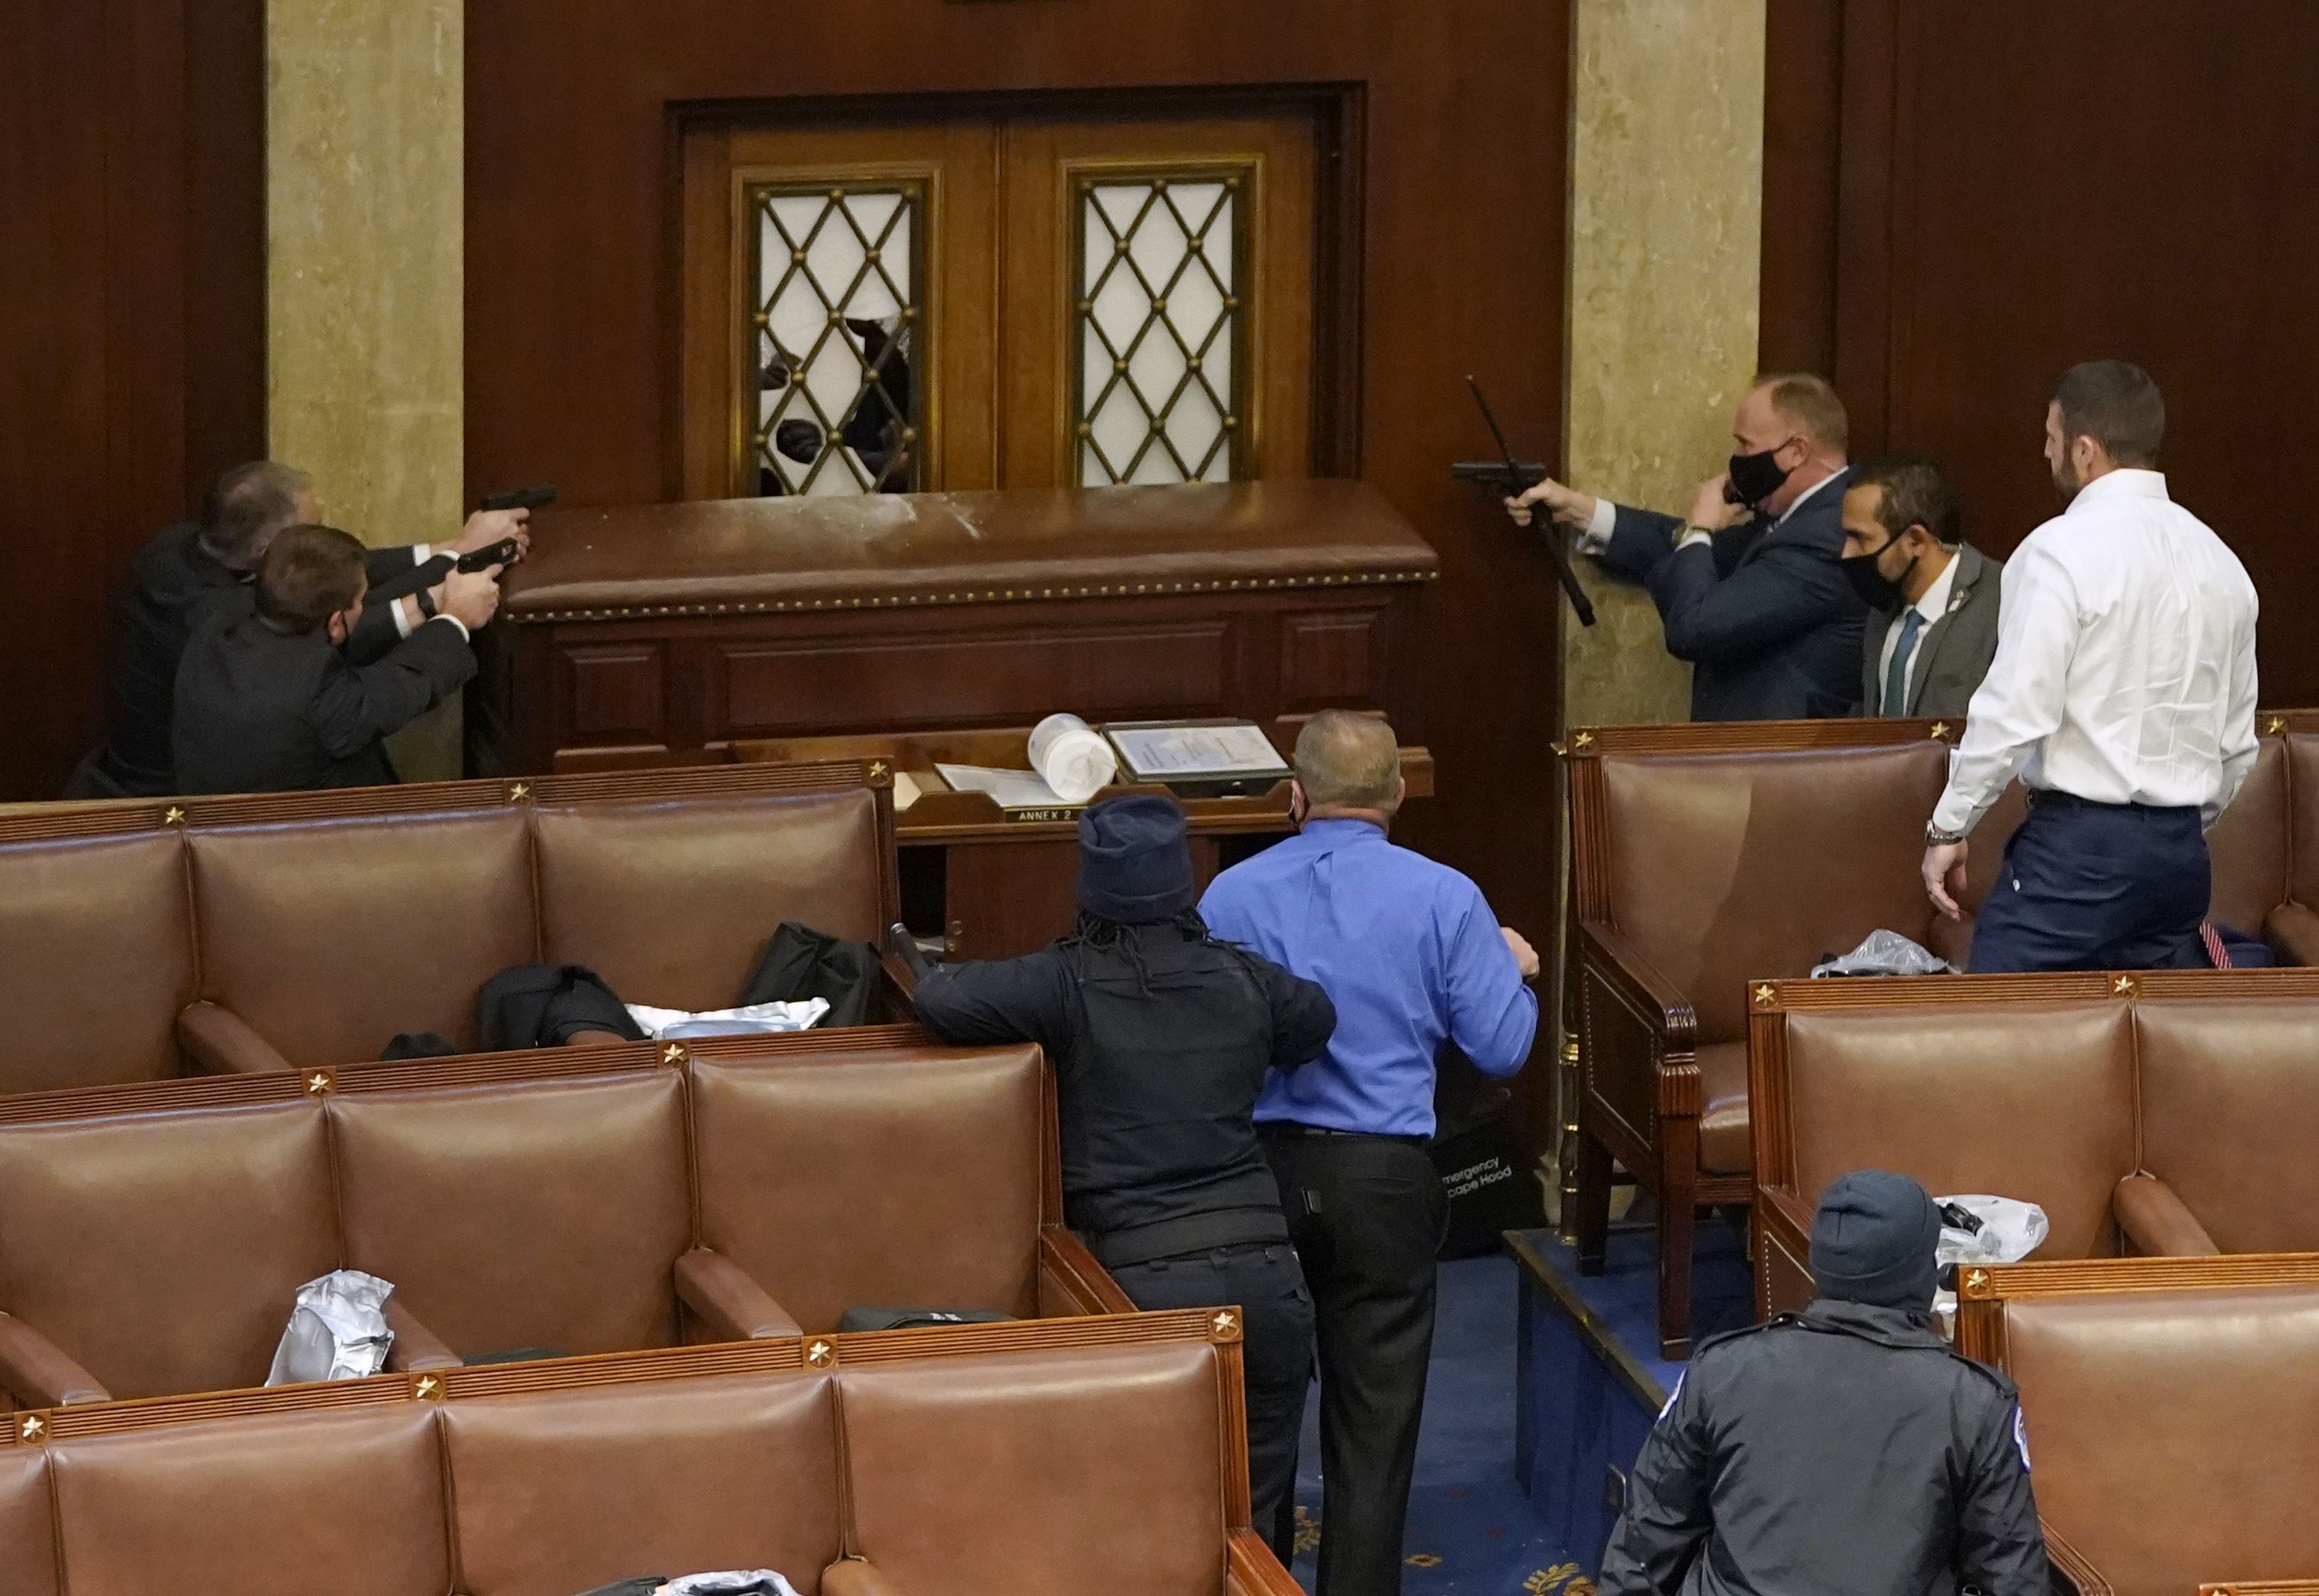 Capitol Police Officers are seen holding back protesters from breaking through the doors of the House Chamber on Jan. 6.